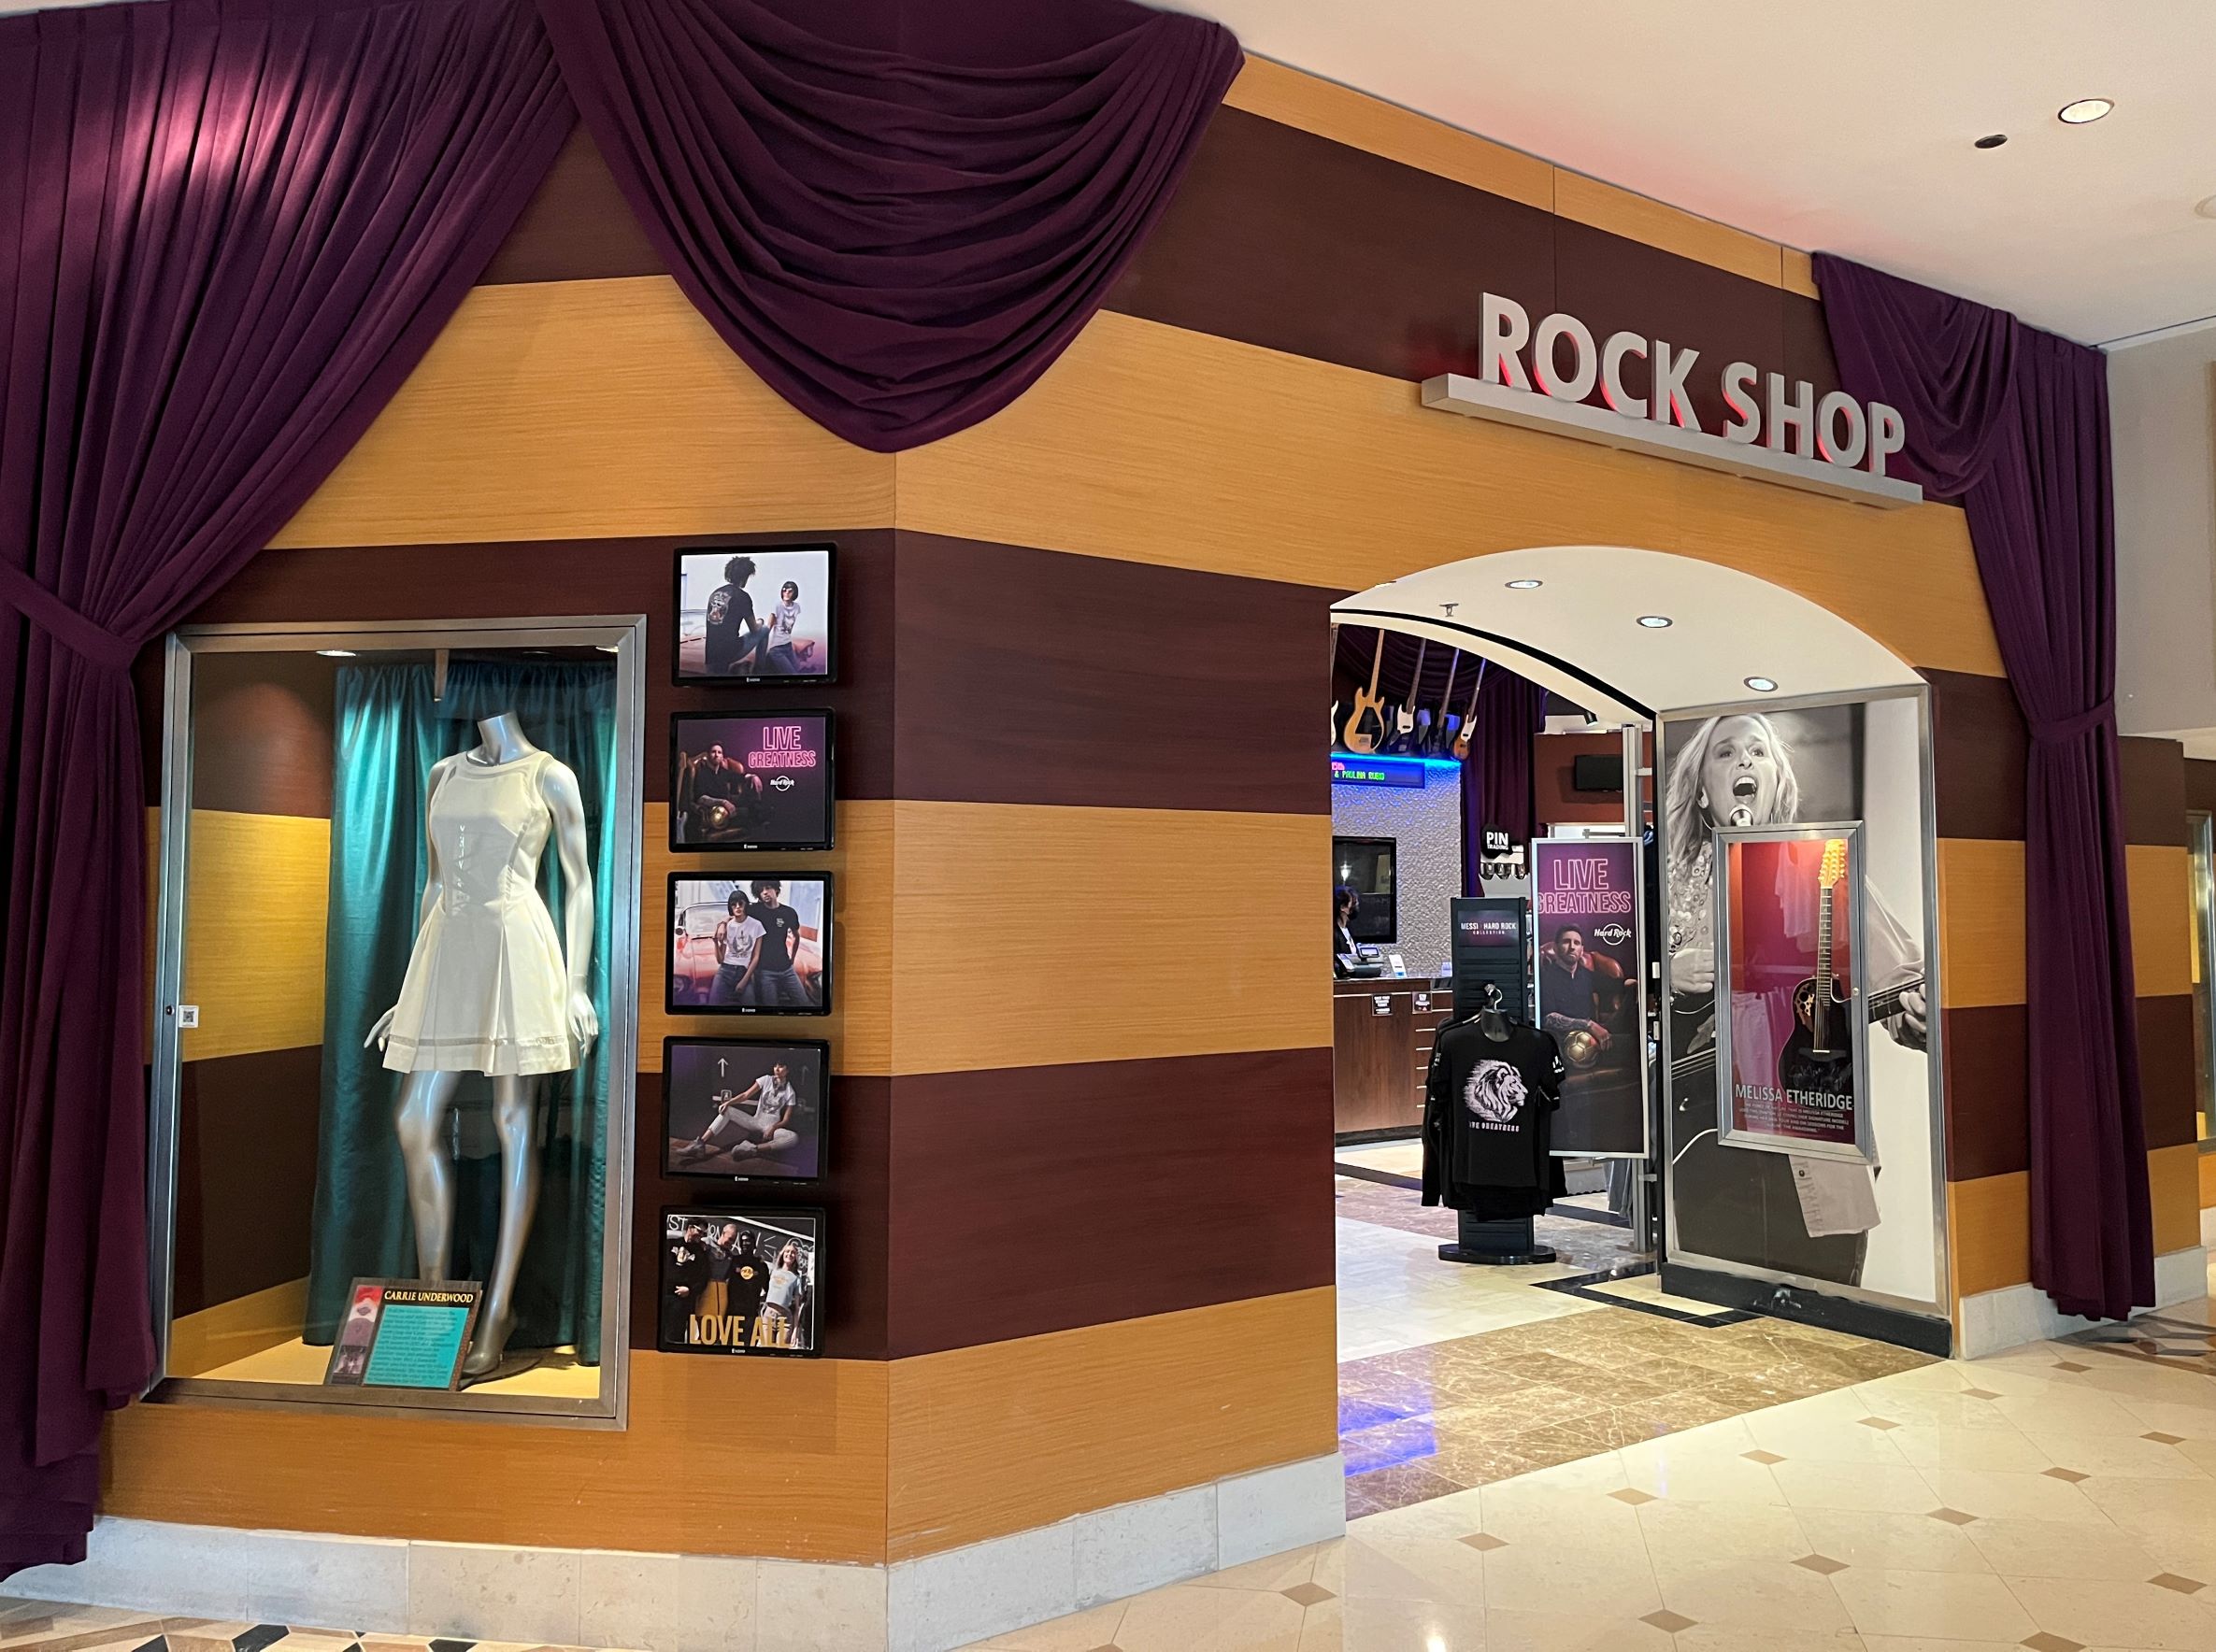 the Rock Shop at the Hard Rock Hotel